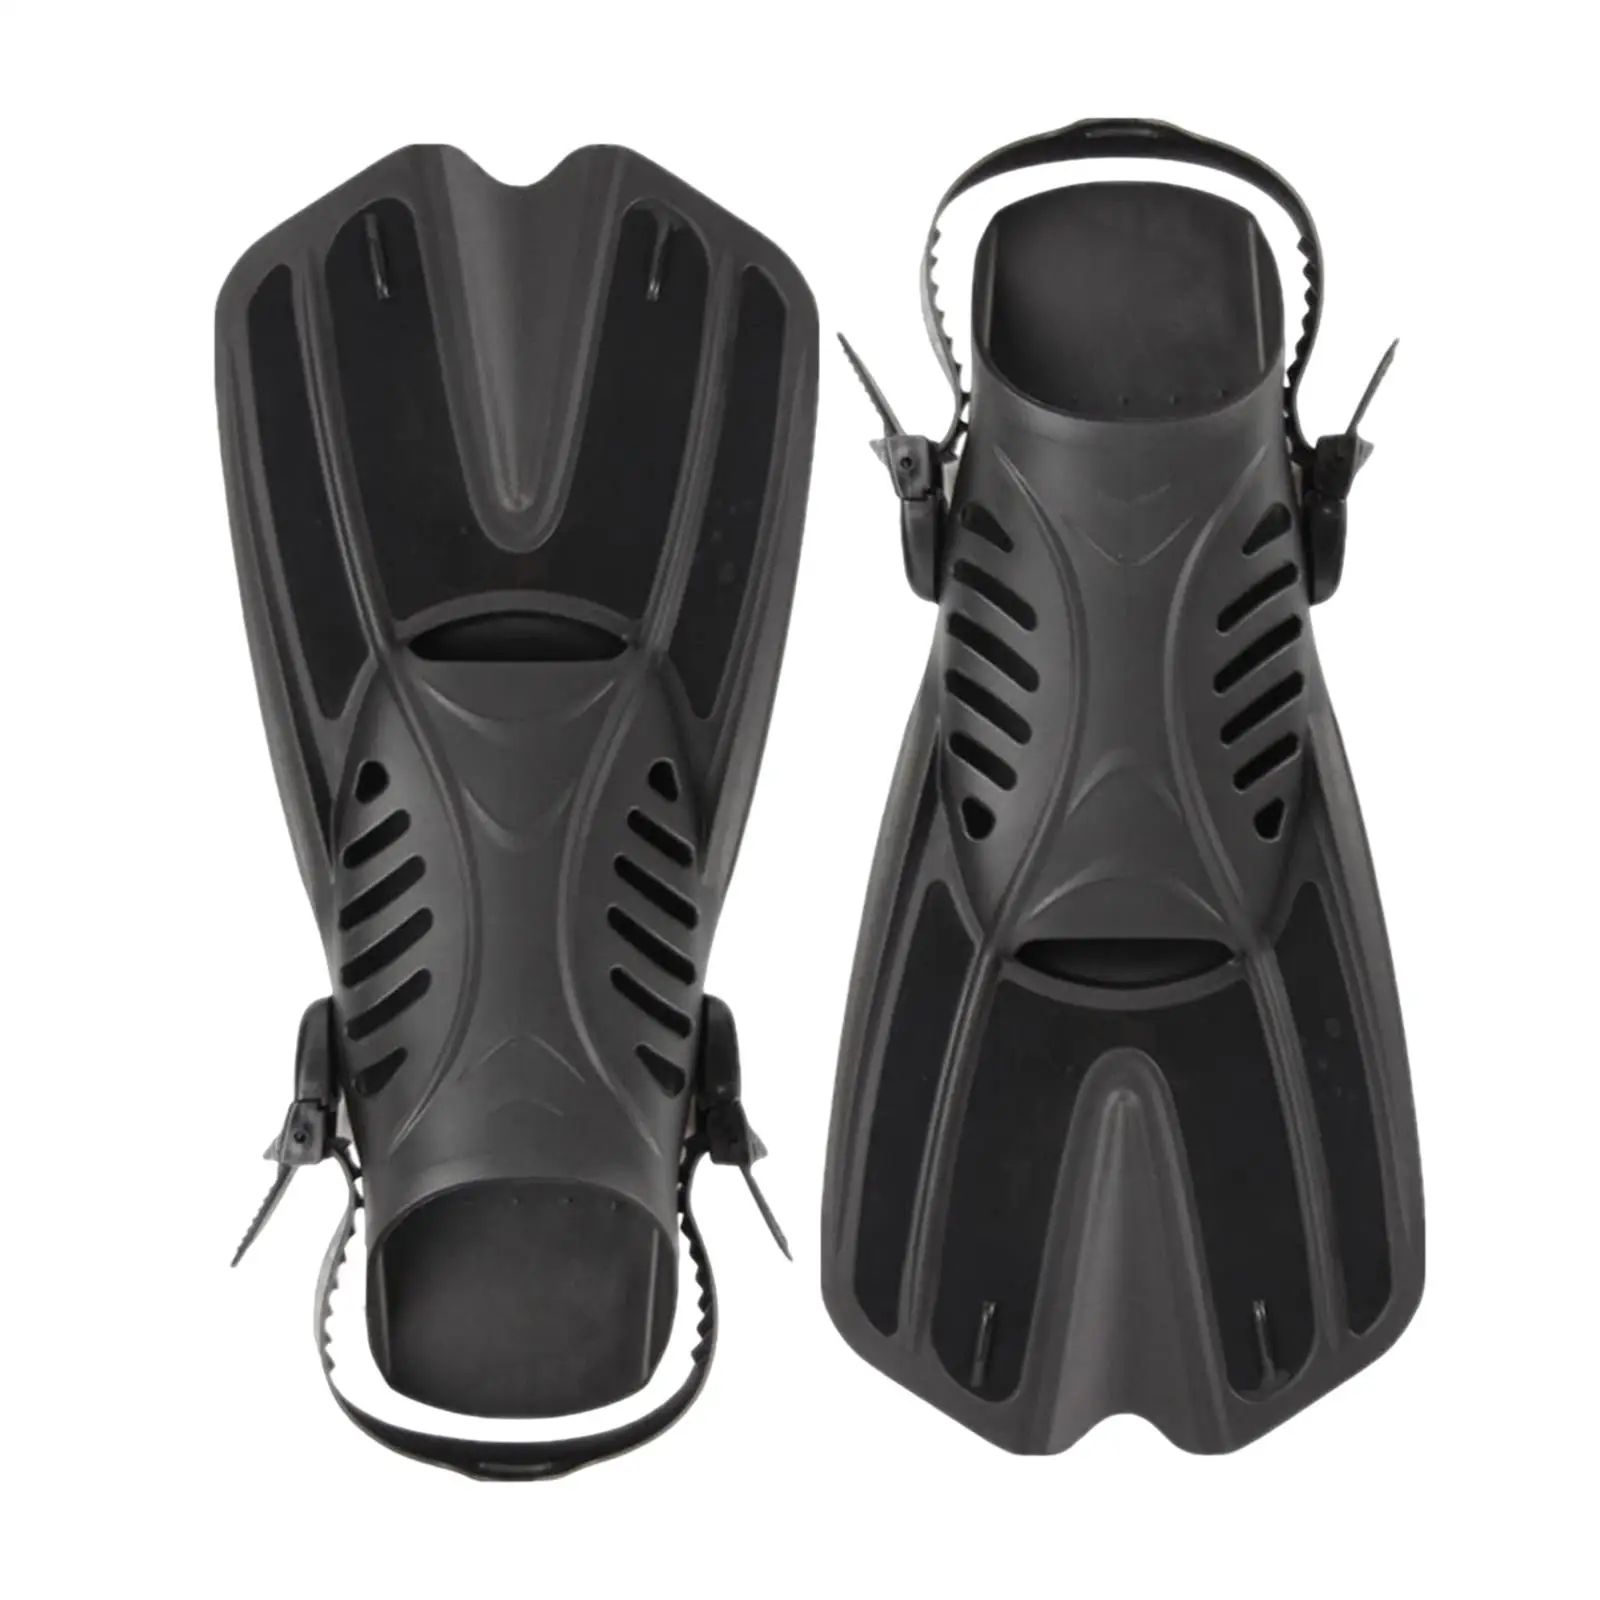 2x Professional Diving Flippers Snorkel Foot Flippers for Water Sports Beginners